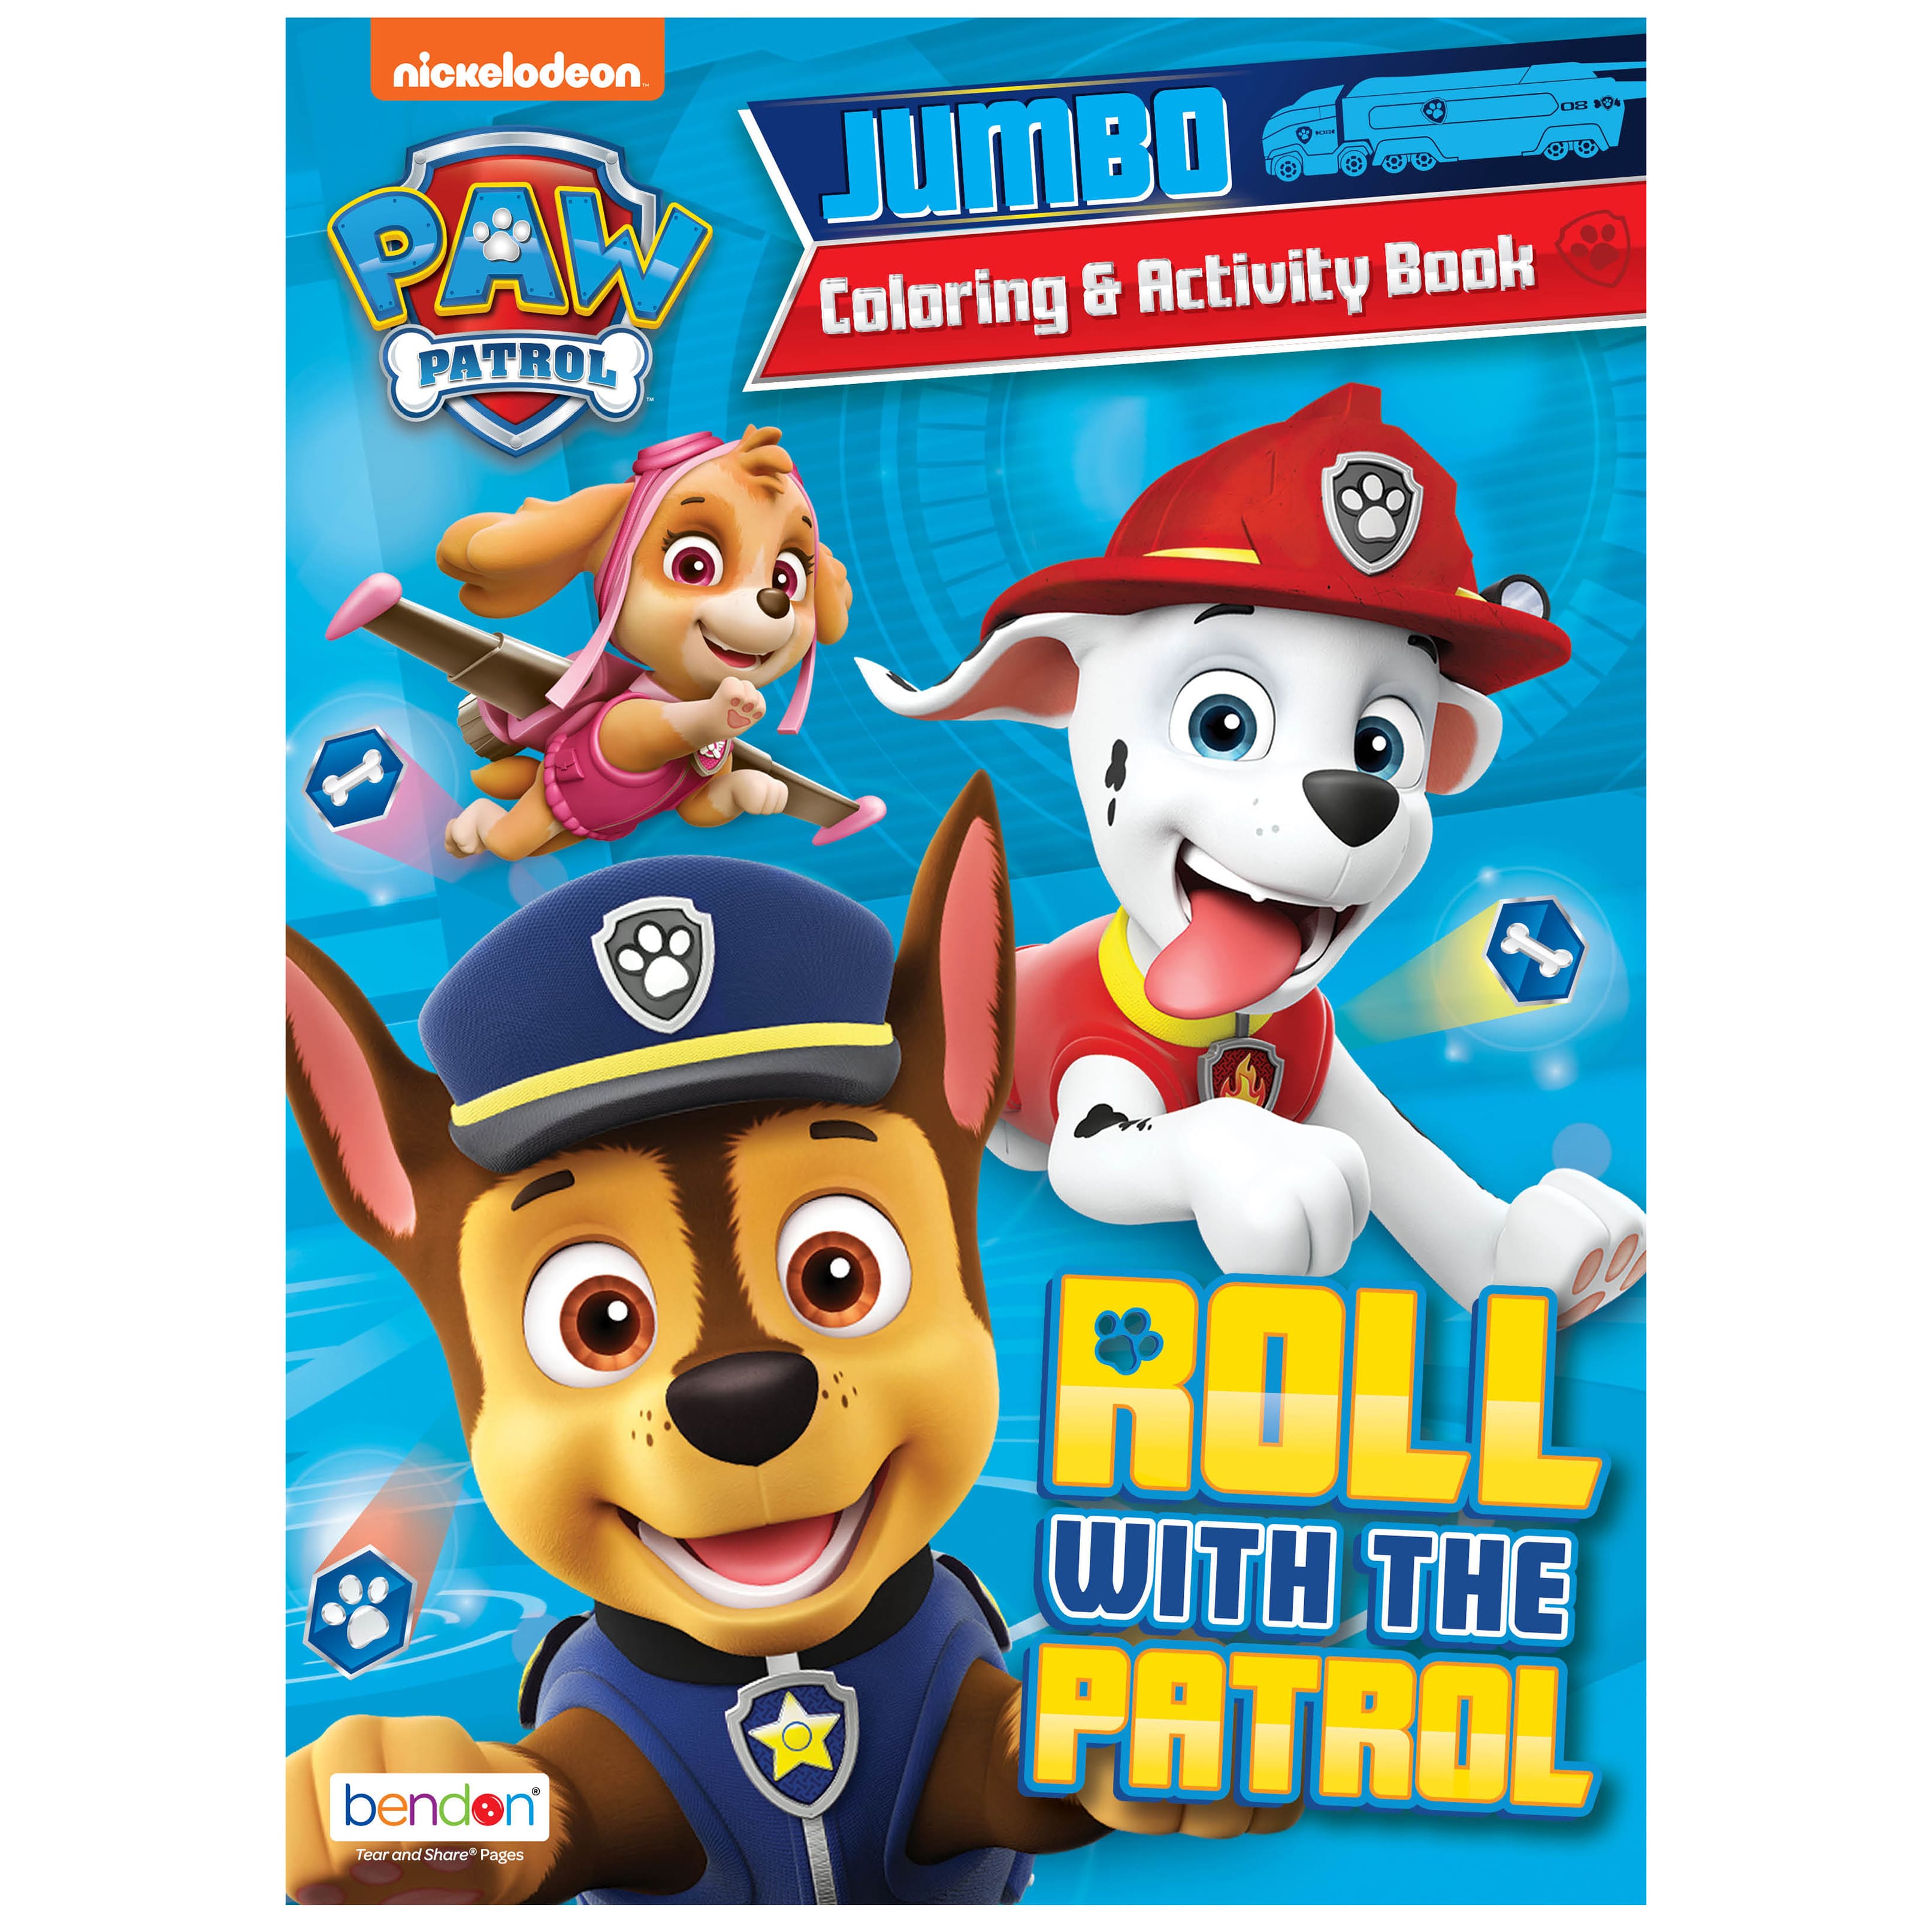 Lot of 2 Different Nickelodeon Paw Patrol Jumbo Coloring & Activity Books NEW 